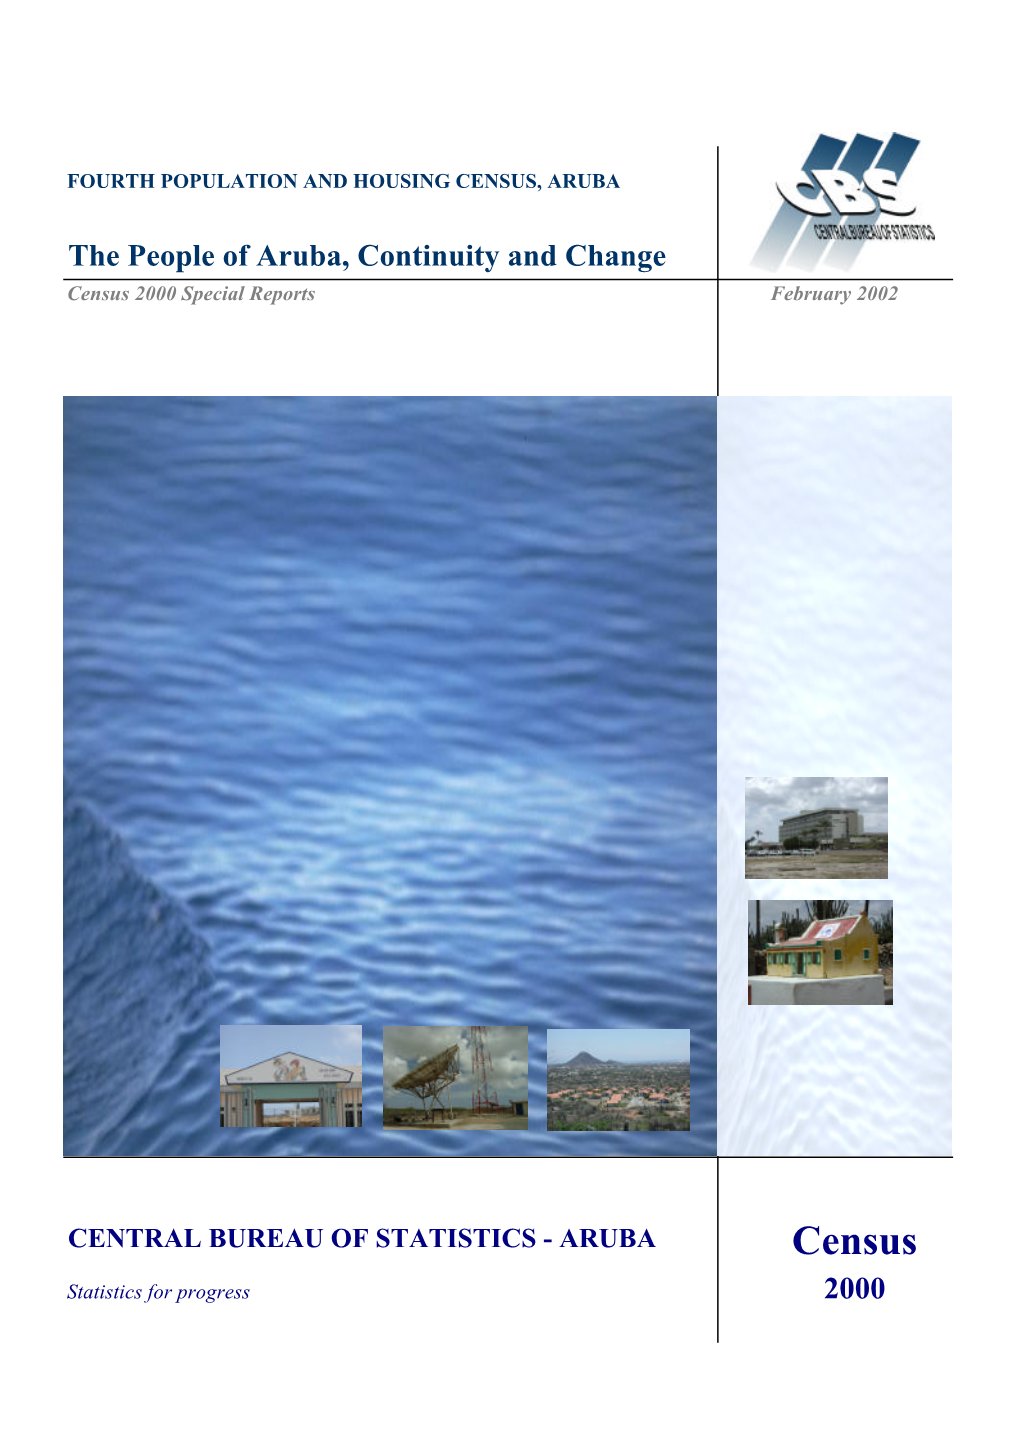 The People of Aruba, Continuity and Change Census 2000 Special Reports February 2002